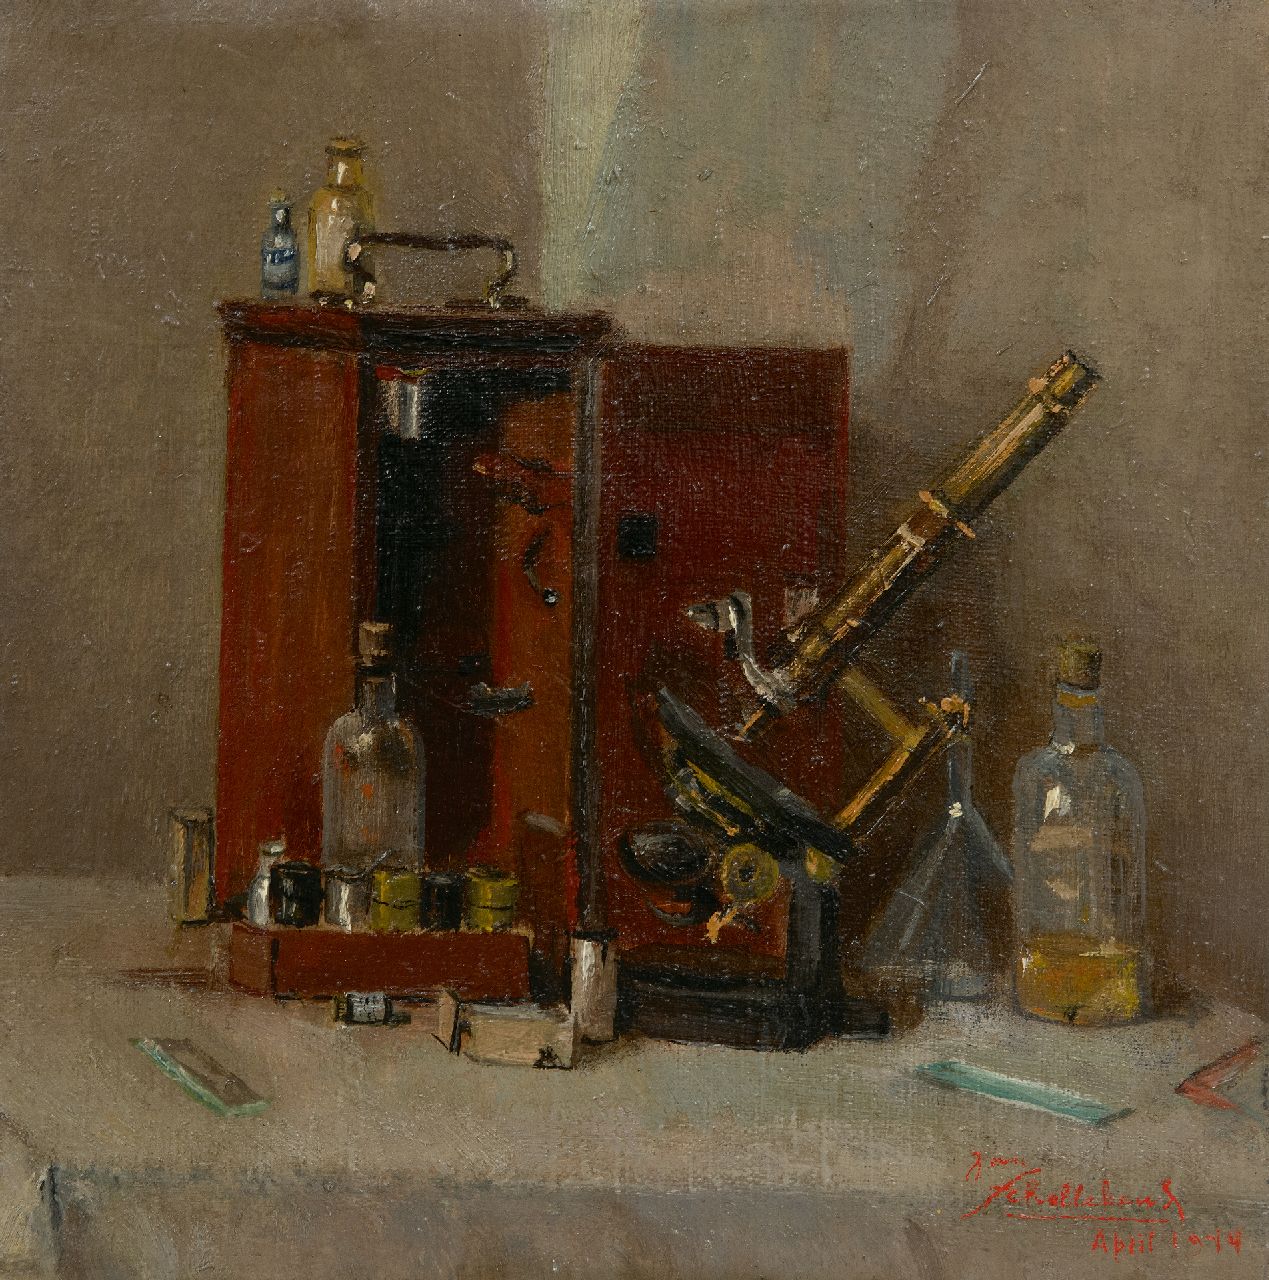 Jan Schellekens | Still life of pharmacy instruments, oil on canvas, 25.0 x 25.0 cm, signed l.r. and dated April 1944